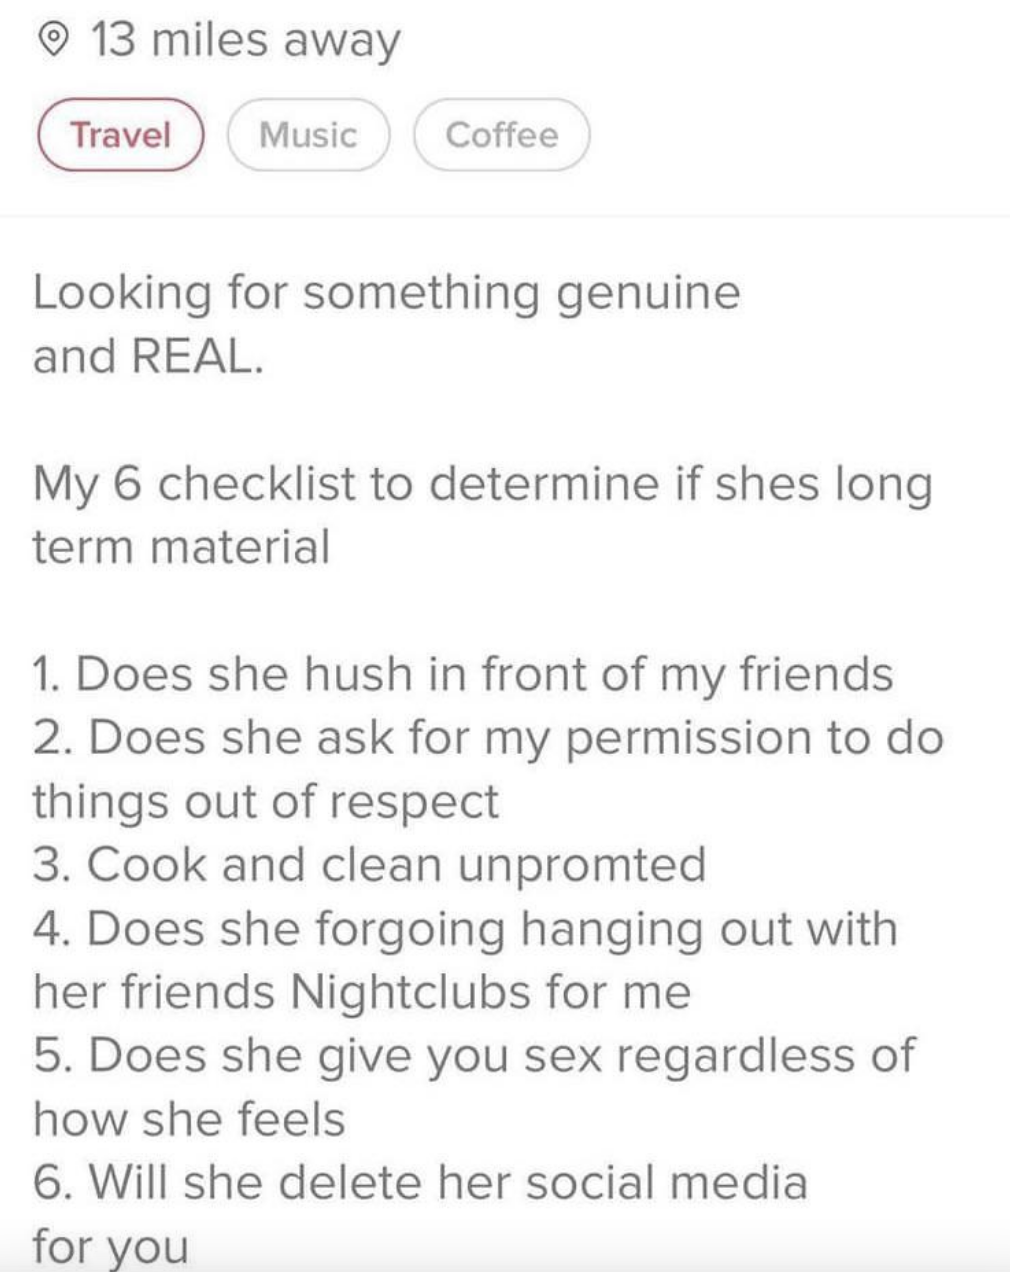 Looking for something real, w/a checklist: does she hush in front of my friends, ask for my permission to do things, cook and clean &quot;unpromted,&quot; forgo hanging out with her friends, give sex regardless of how she feels, delete her social media